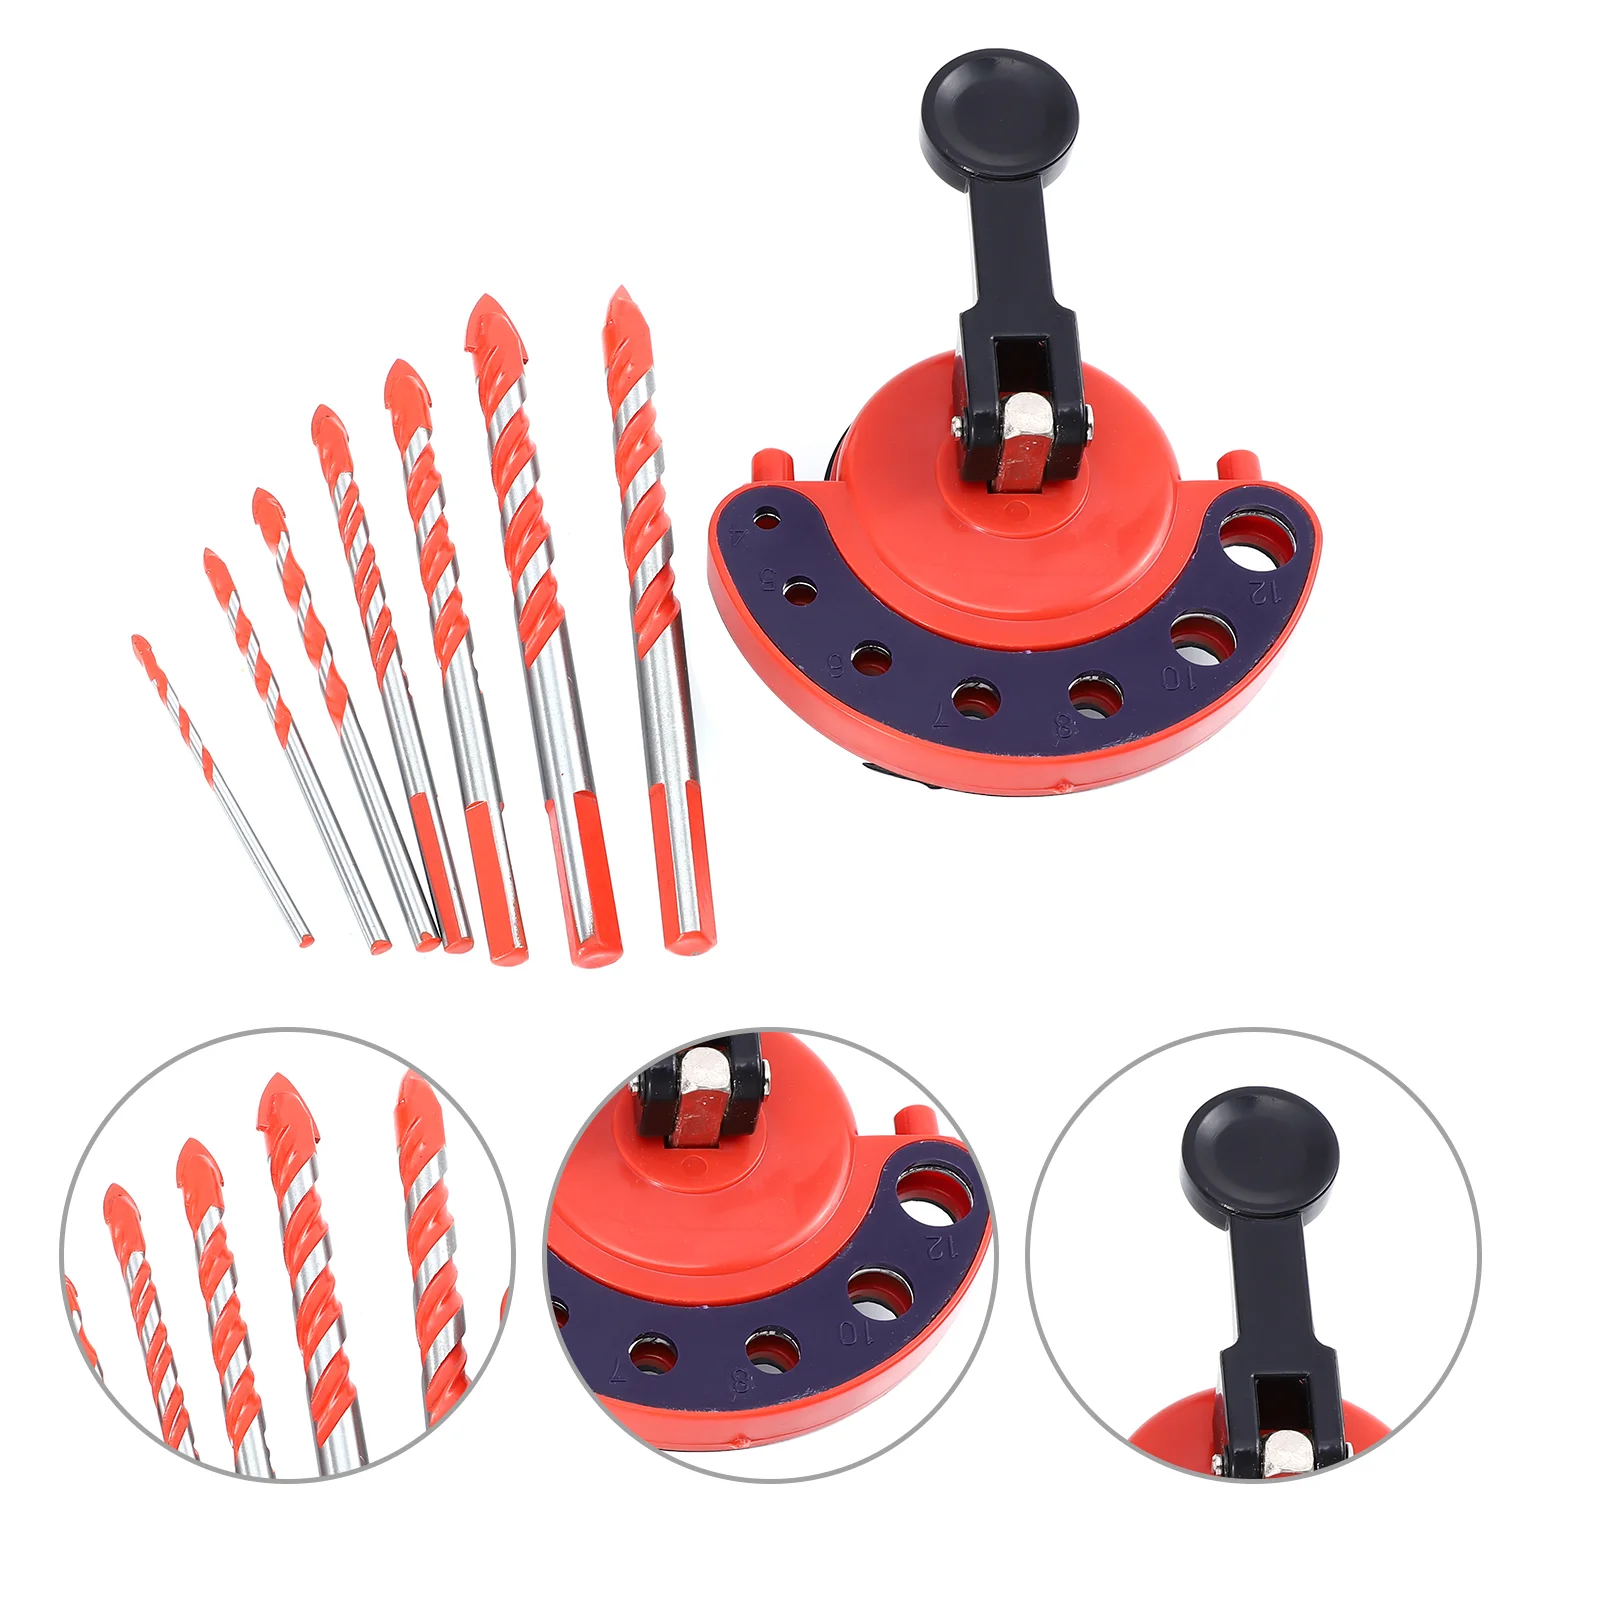 

Bit Drill Drilling Tool Woodworking Bits Screwdriver Marble Punch Guide Brick Tiles Wall Porcelain Cement Cork Masonry